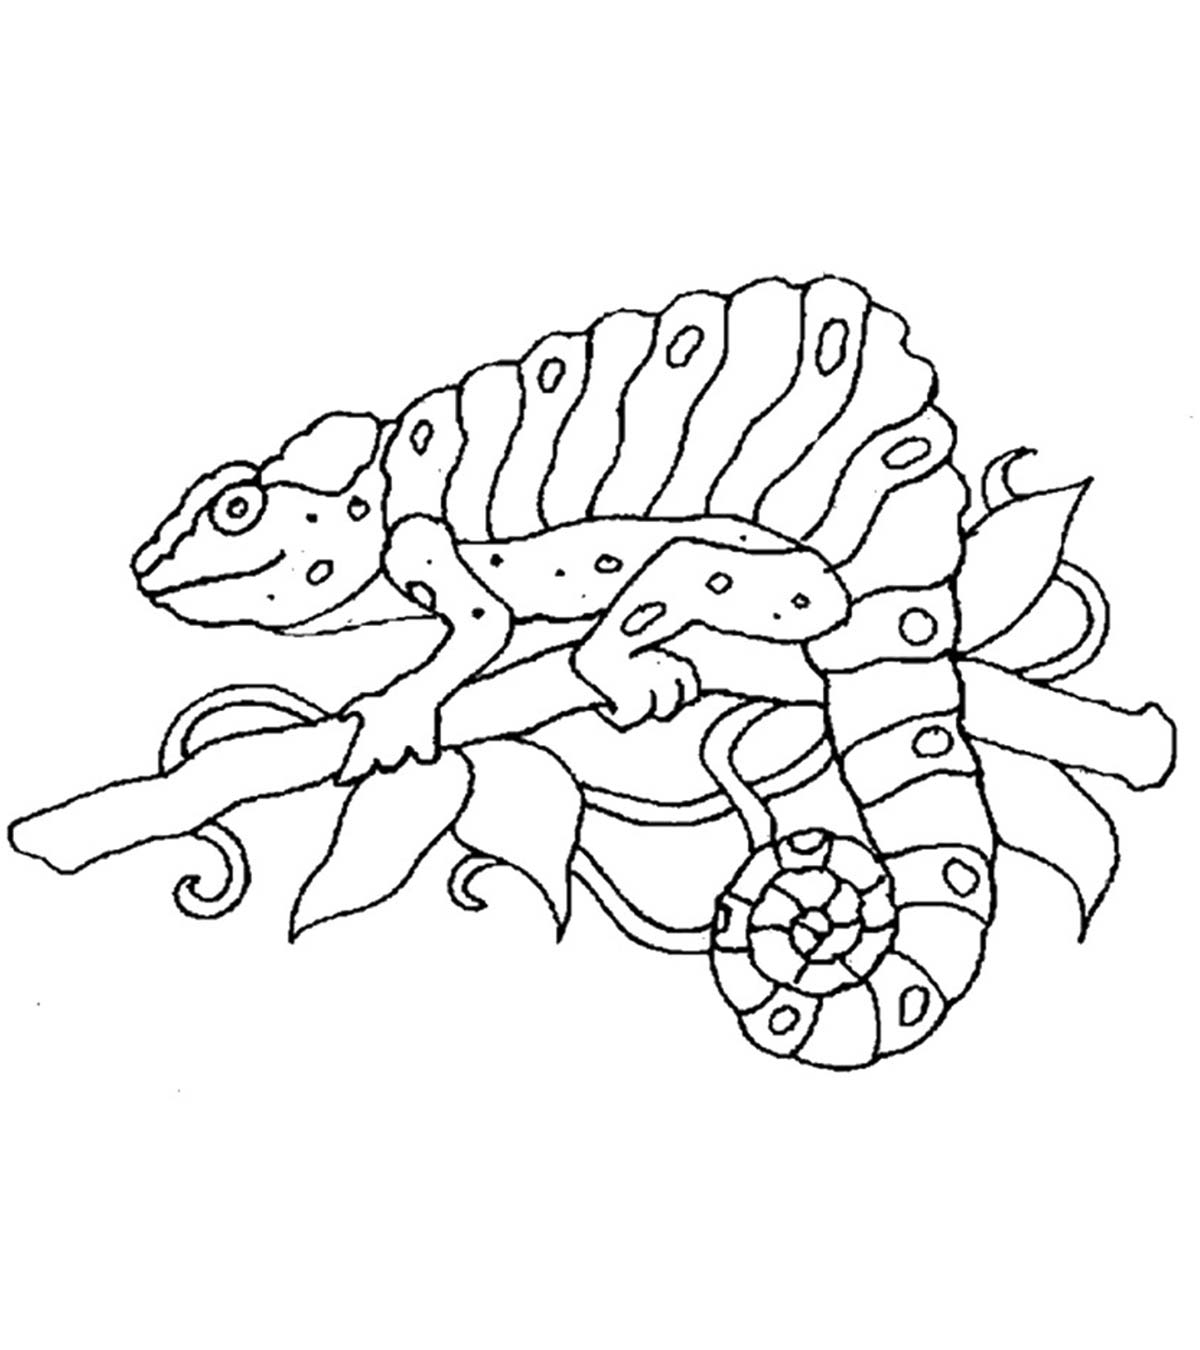 10 Best Chameleon Coloring Pages For Your Toddler_image